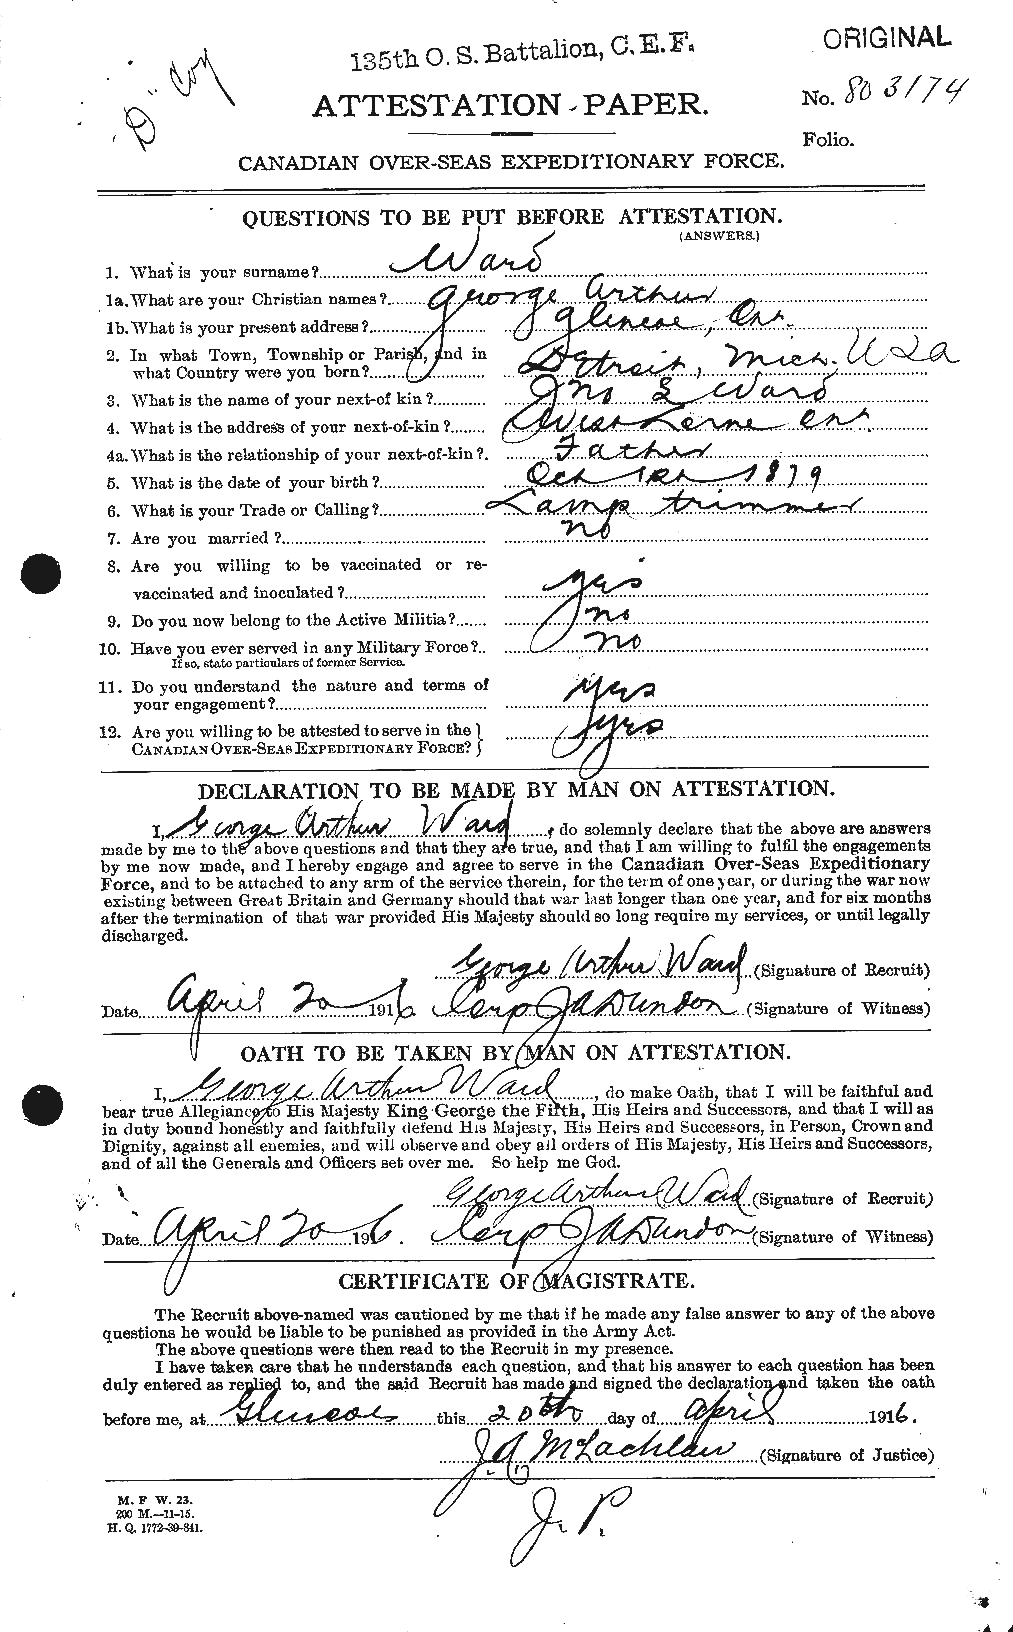 Personnel Records of the First World War - CEF 657768a